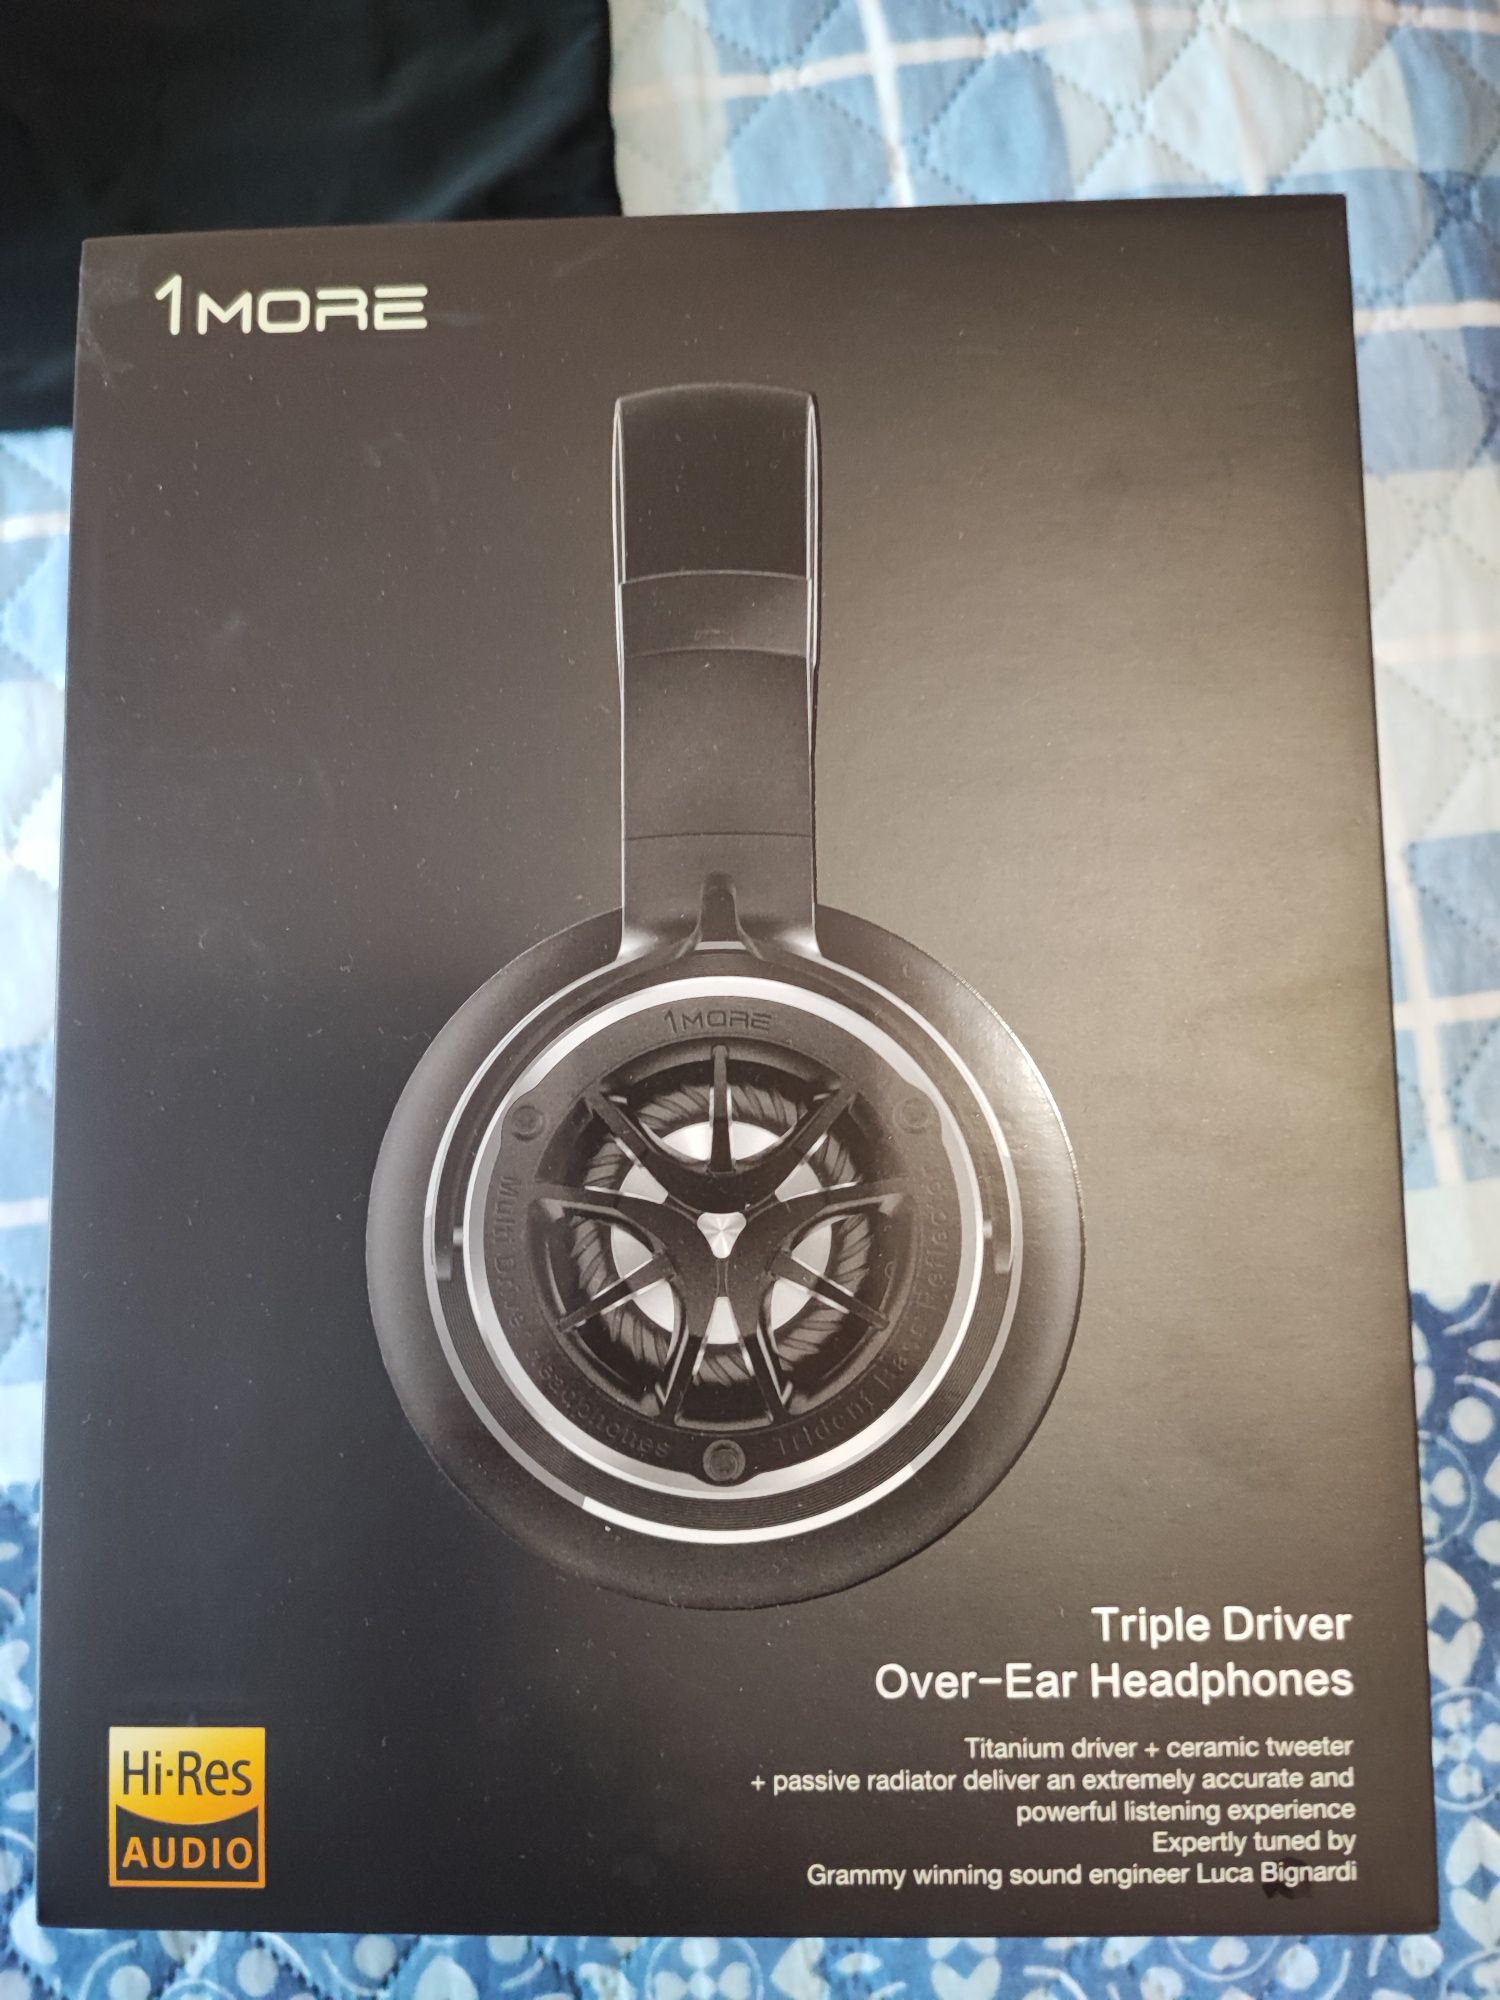 1MORE Triple Driver Over-Ear